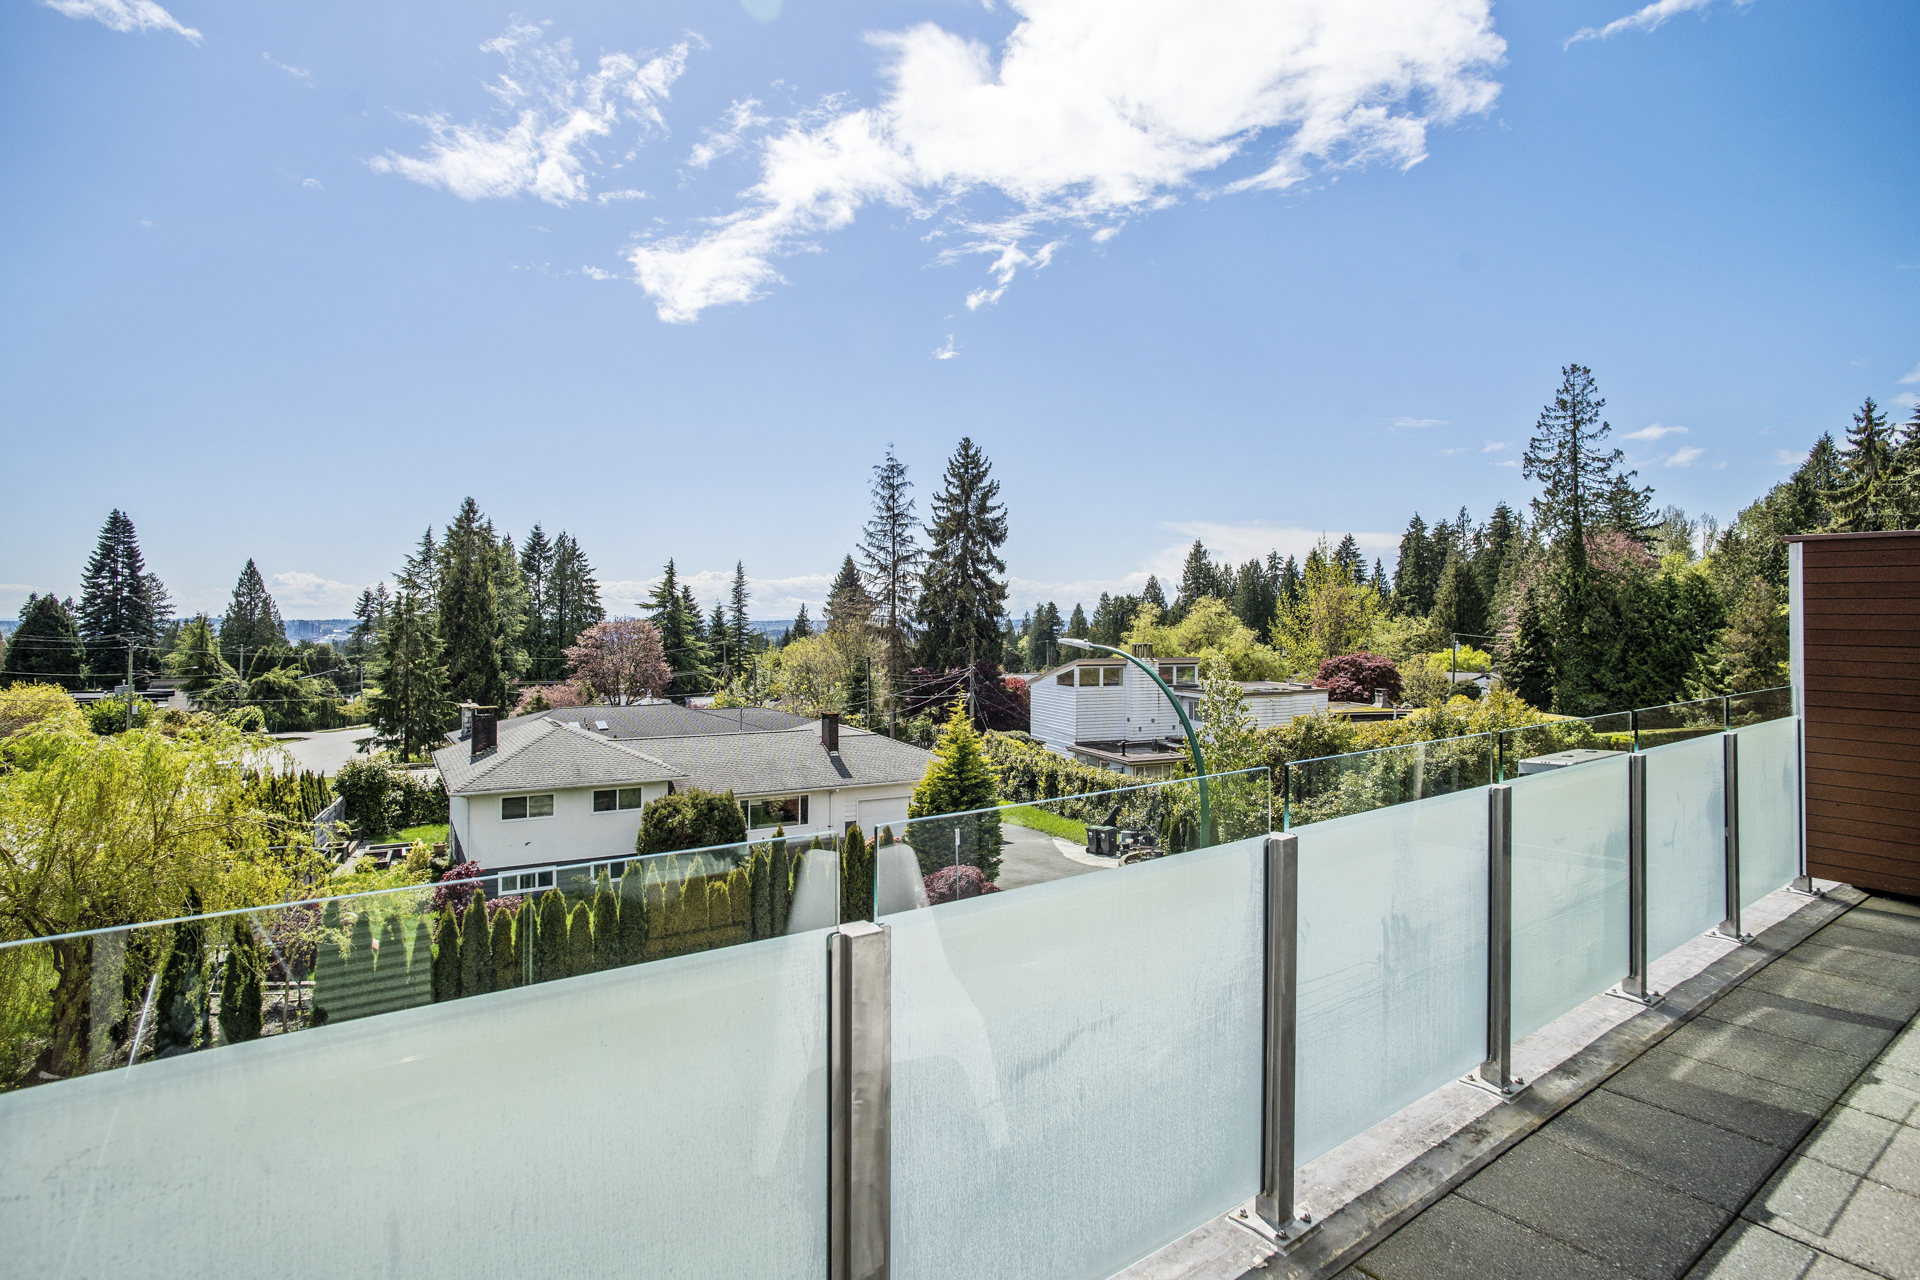 303 650 Evergreen Place, North Vancouver - For sale by Rossetti Realty - photo 7